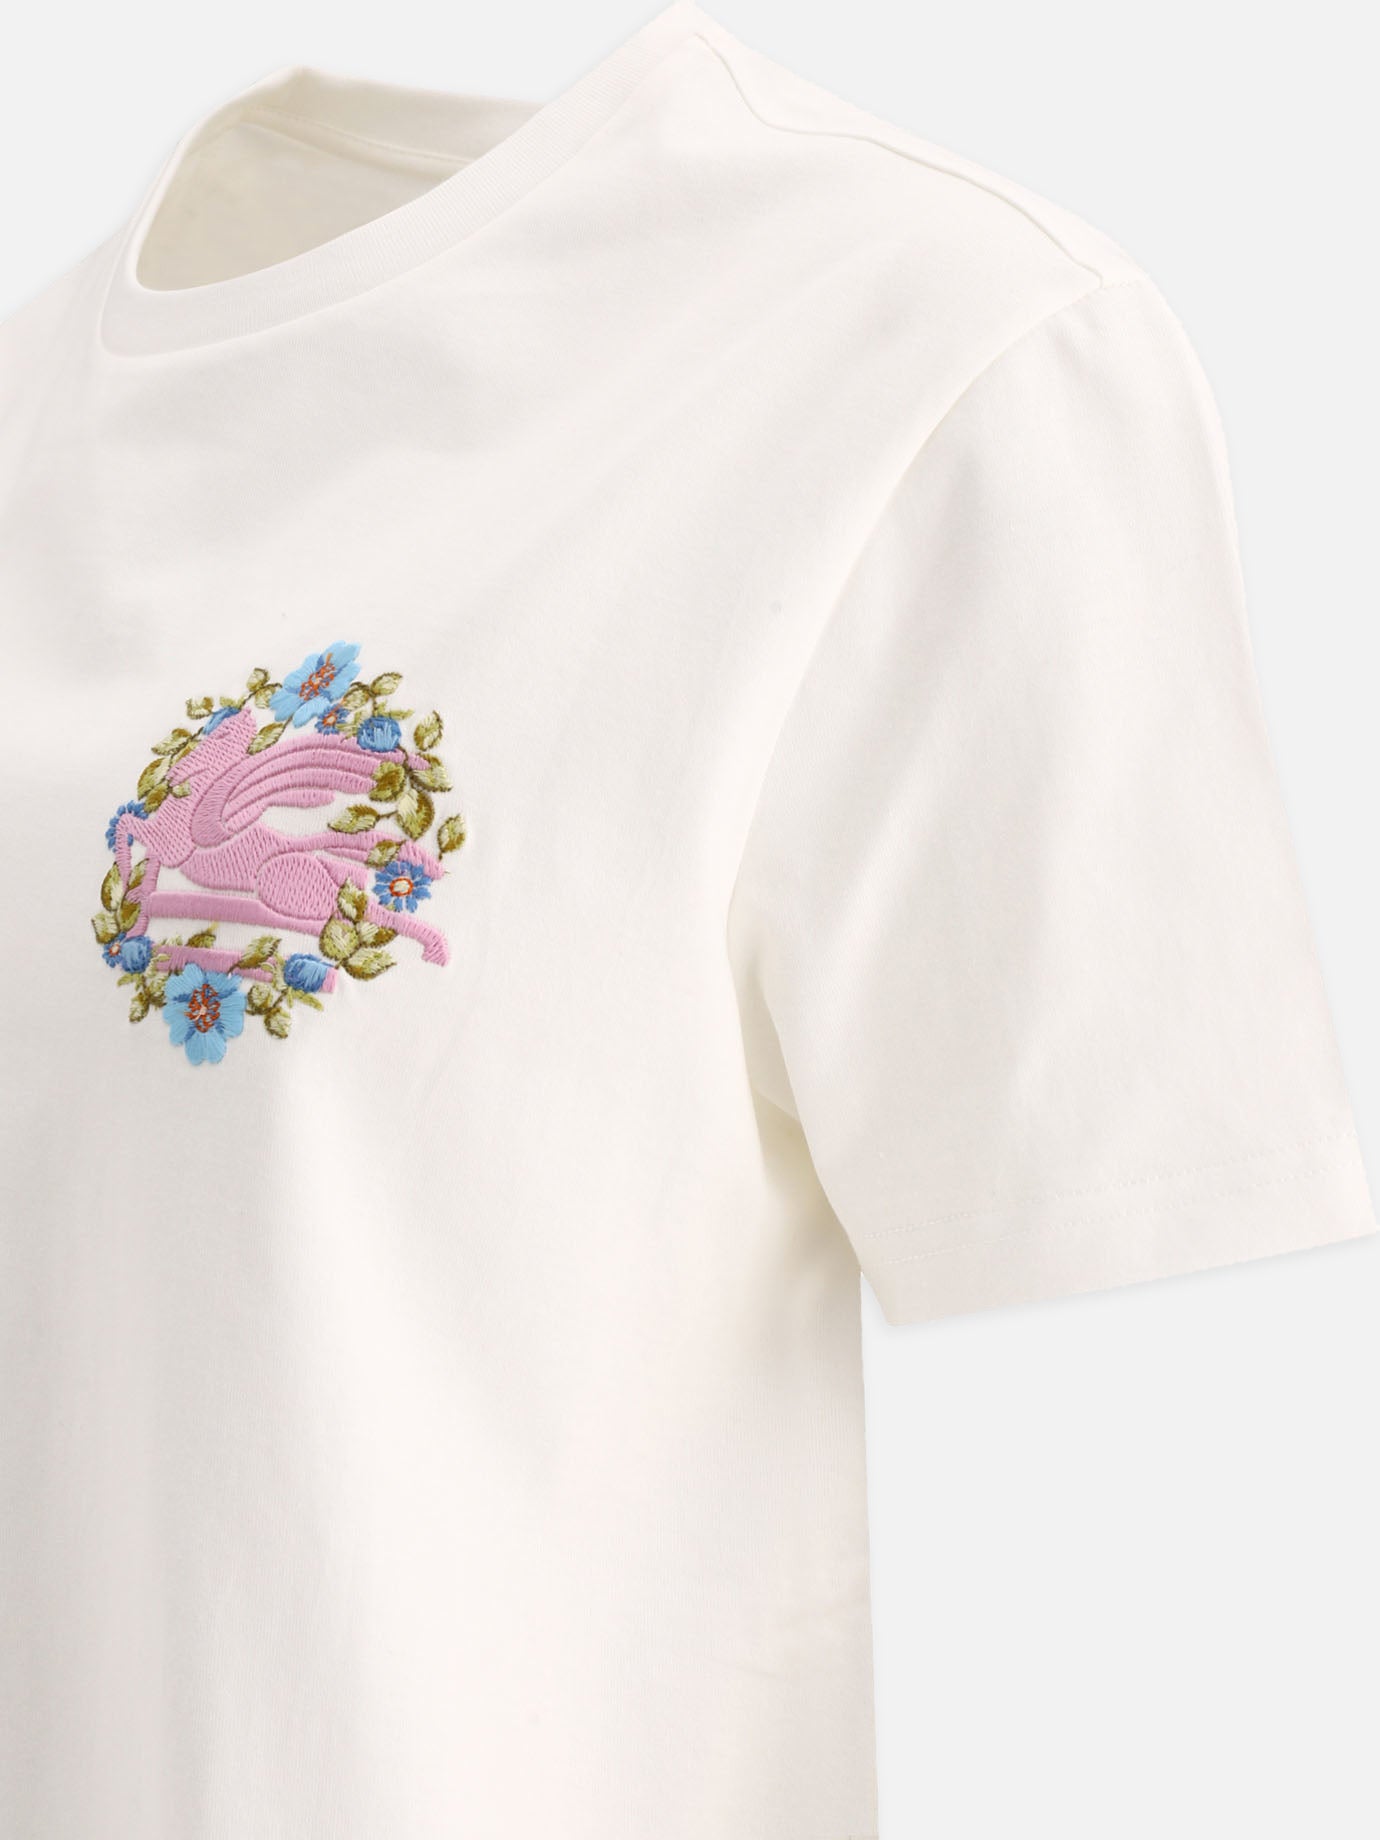 T-shirt with embroidery